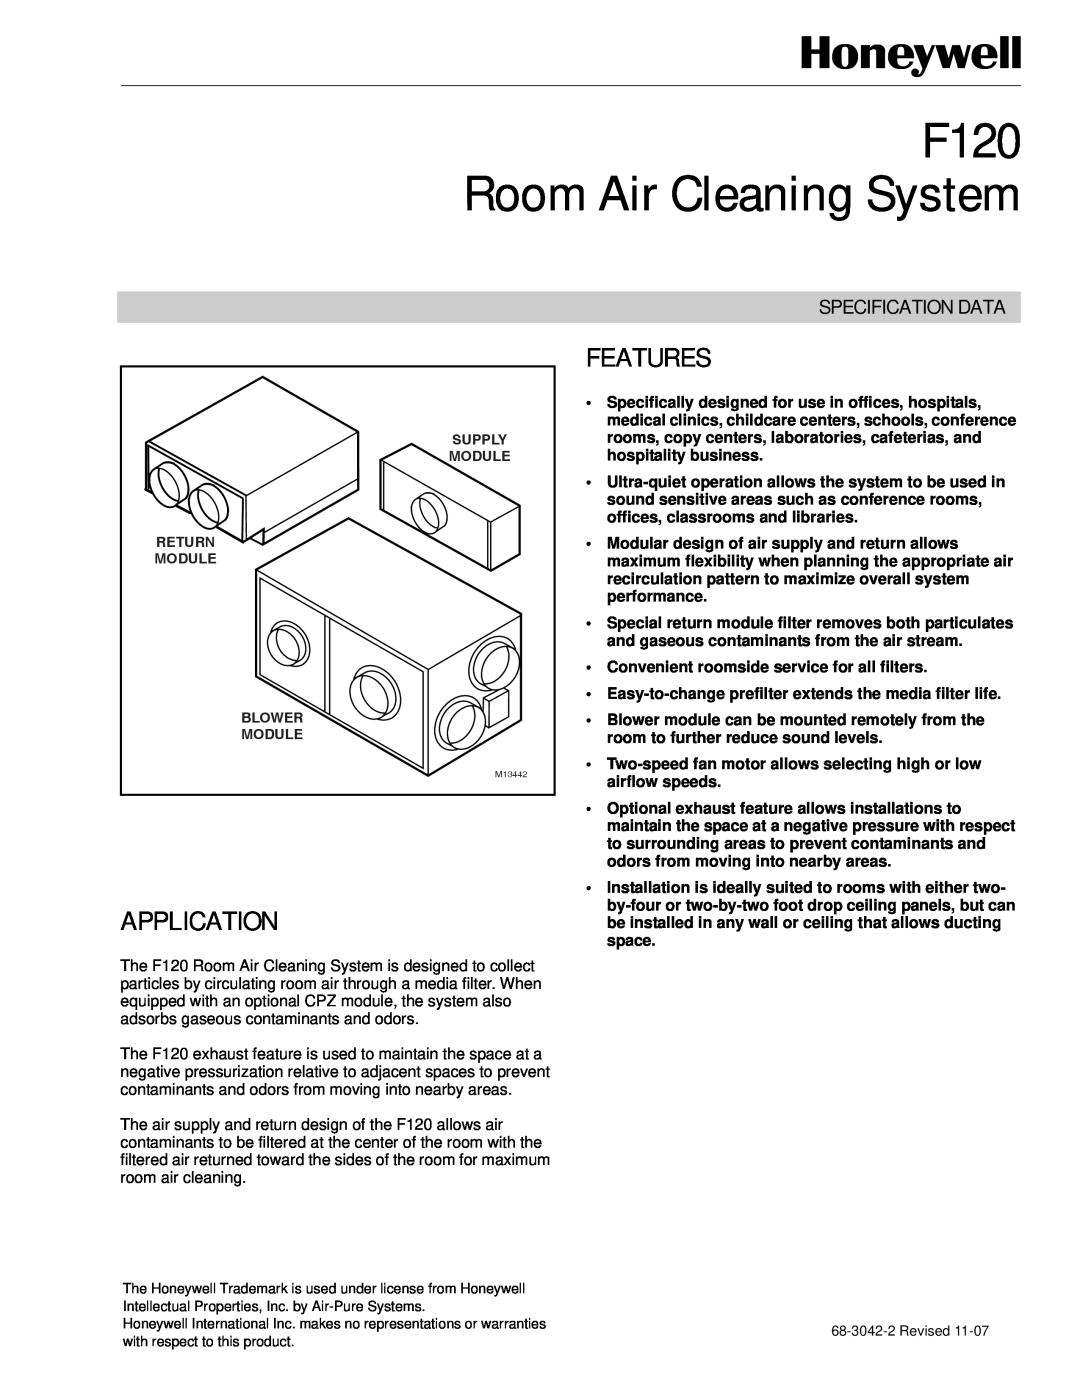 Honeywell F120A1007, F120A1015 manual Features, F120 Room Air Cleaning System, Application, Specification Data 